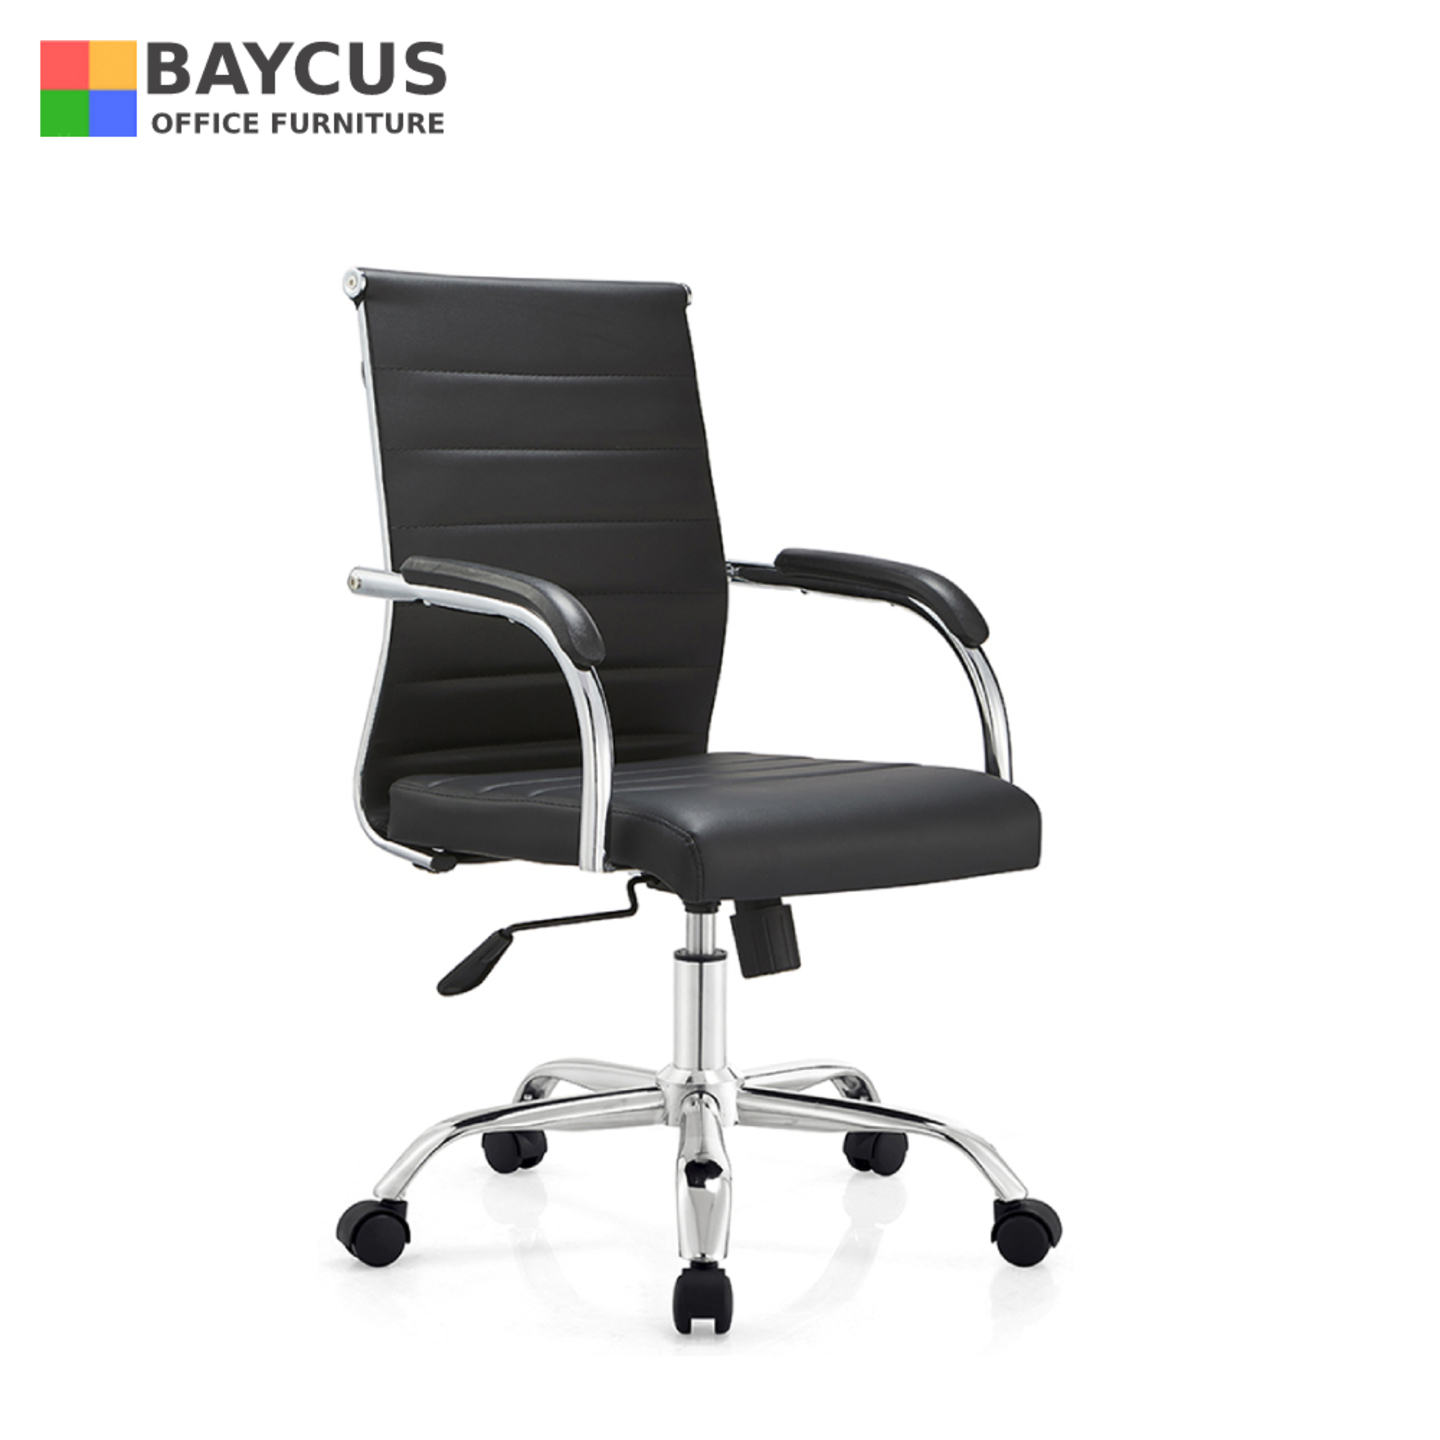 Biotite Conference Chair (PU Leather)